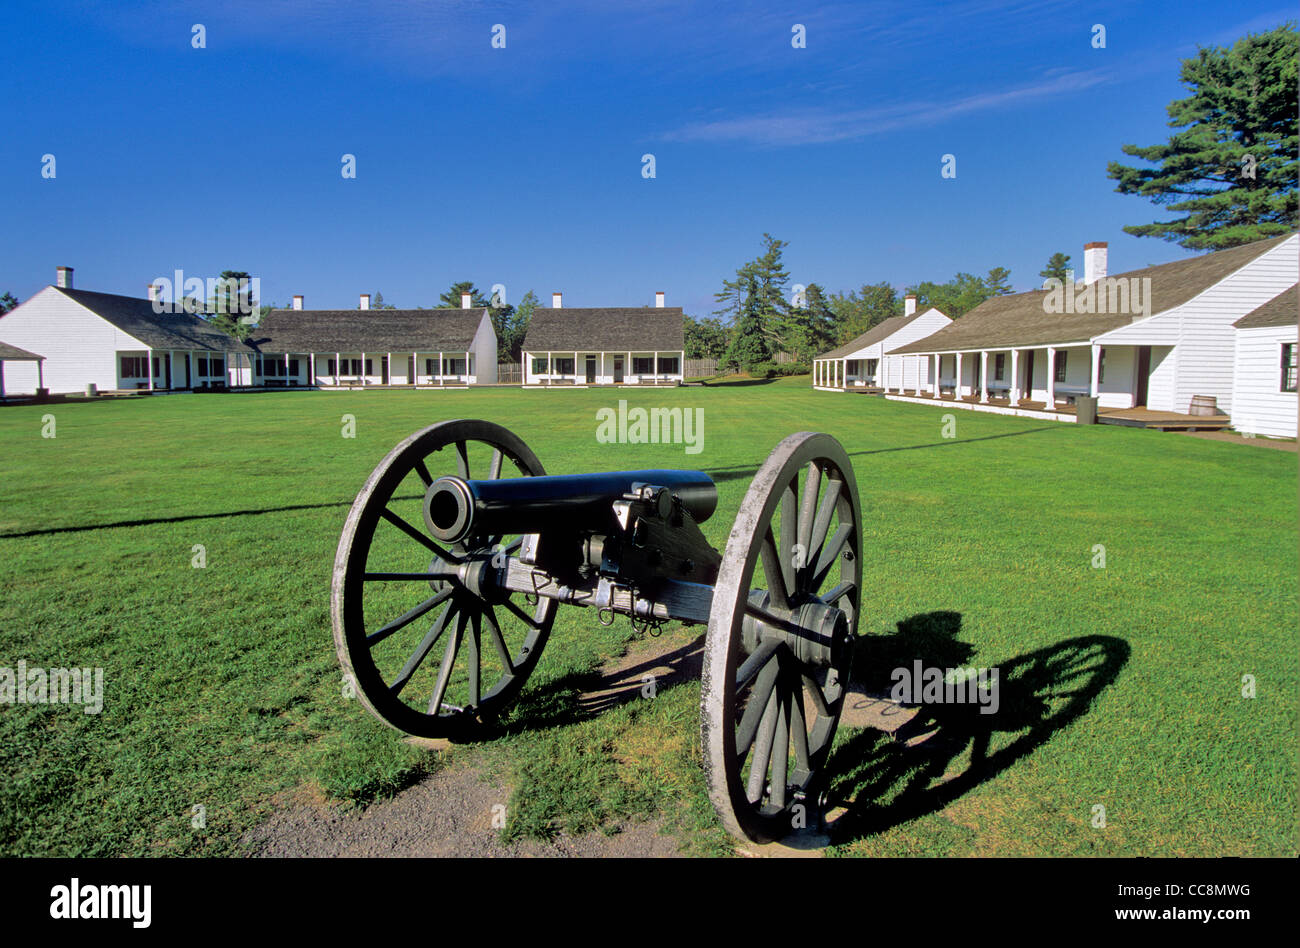 Fort Wilkins State Park, a historic US Army Post at Copper Harbor, Keweenaw Peninsula, Michigan, AGPix 0640 Stock Photo